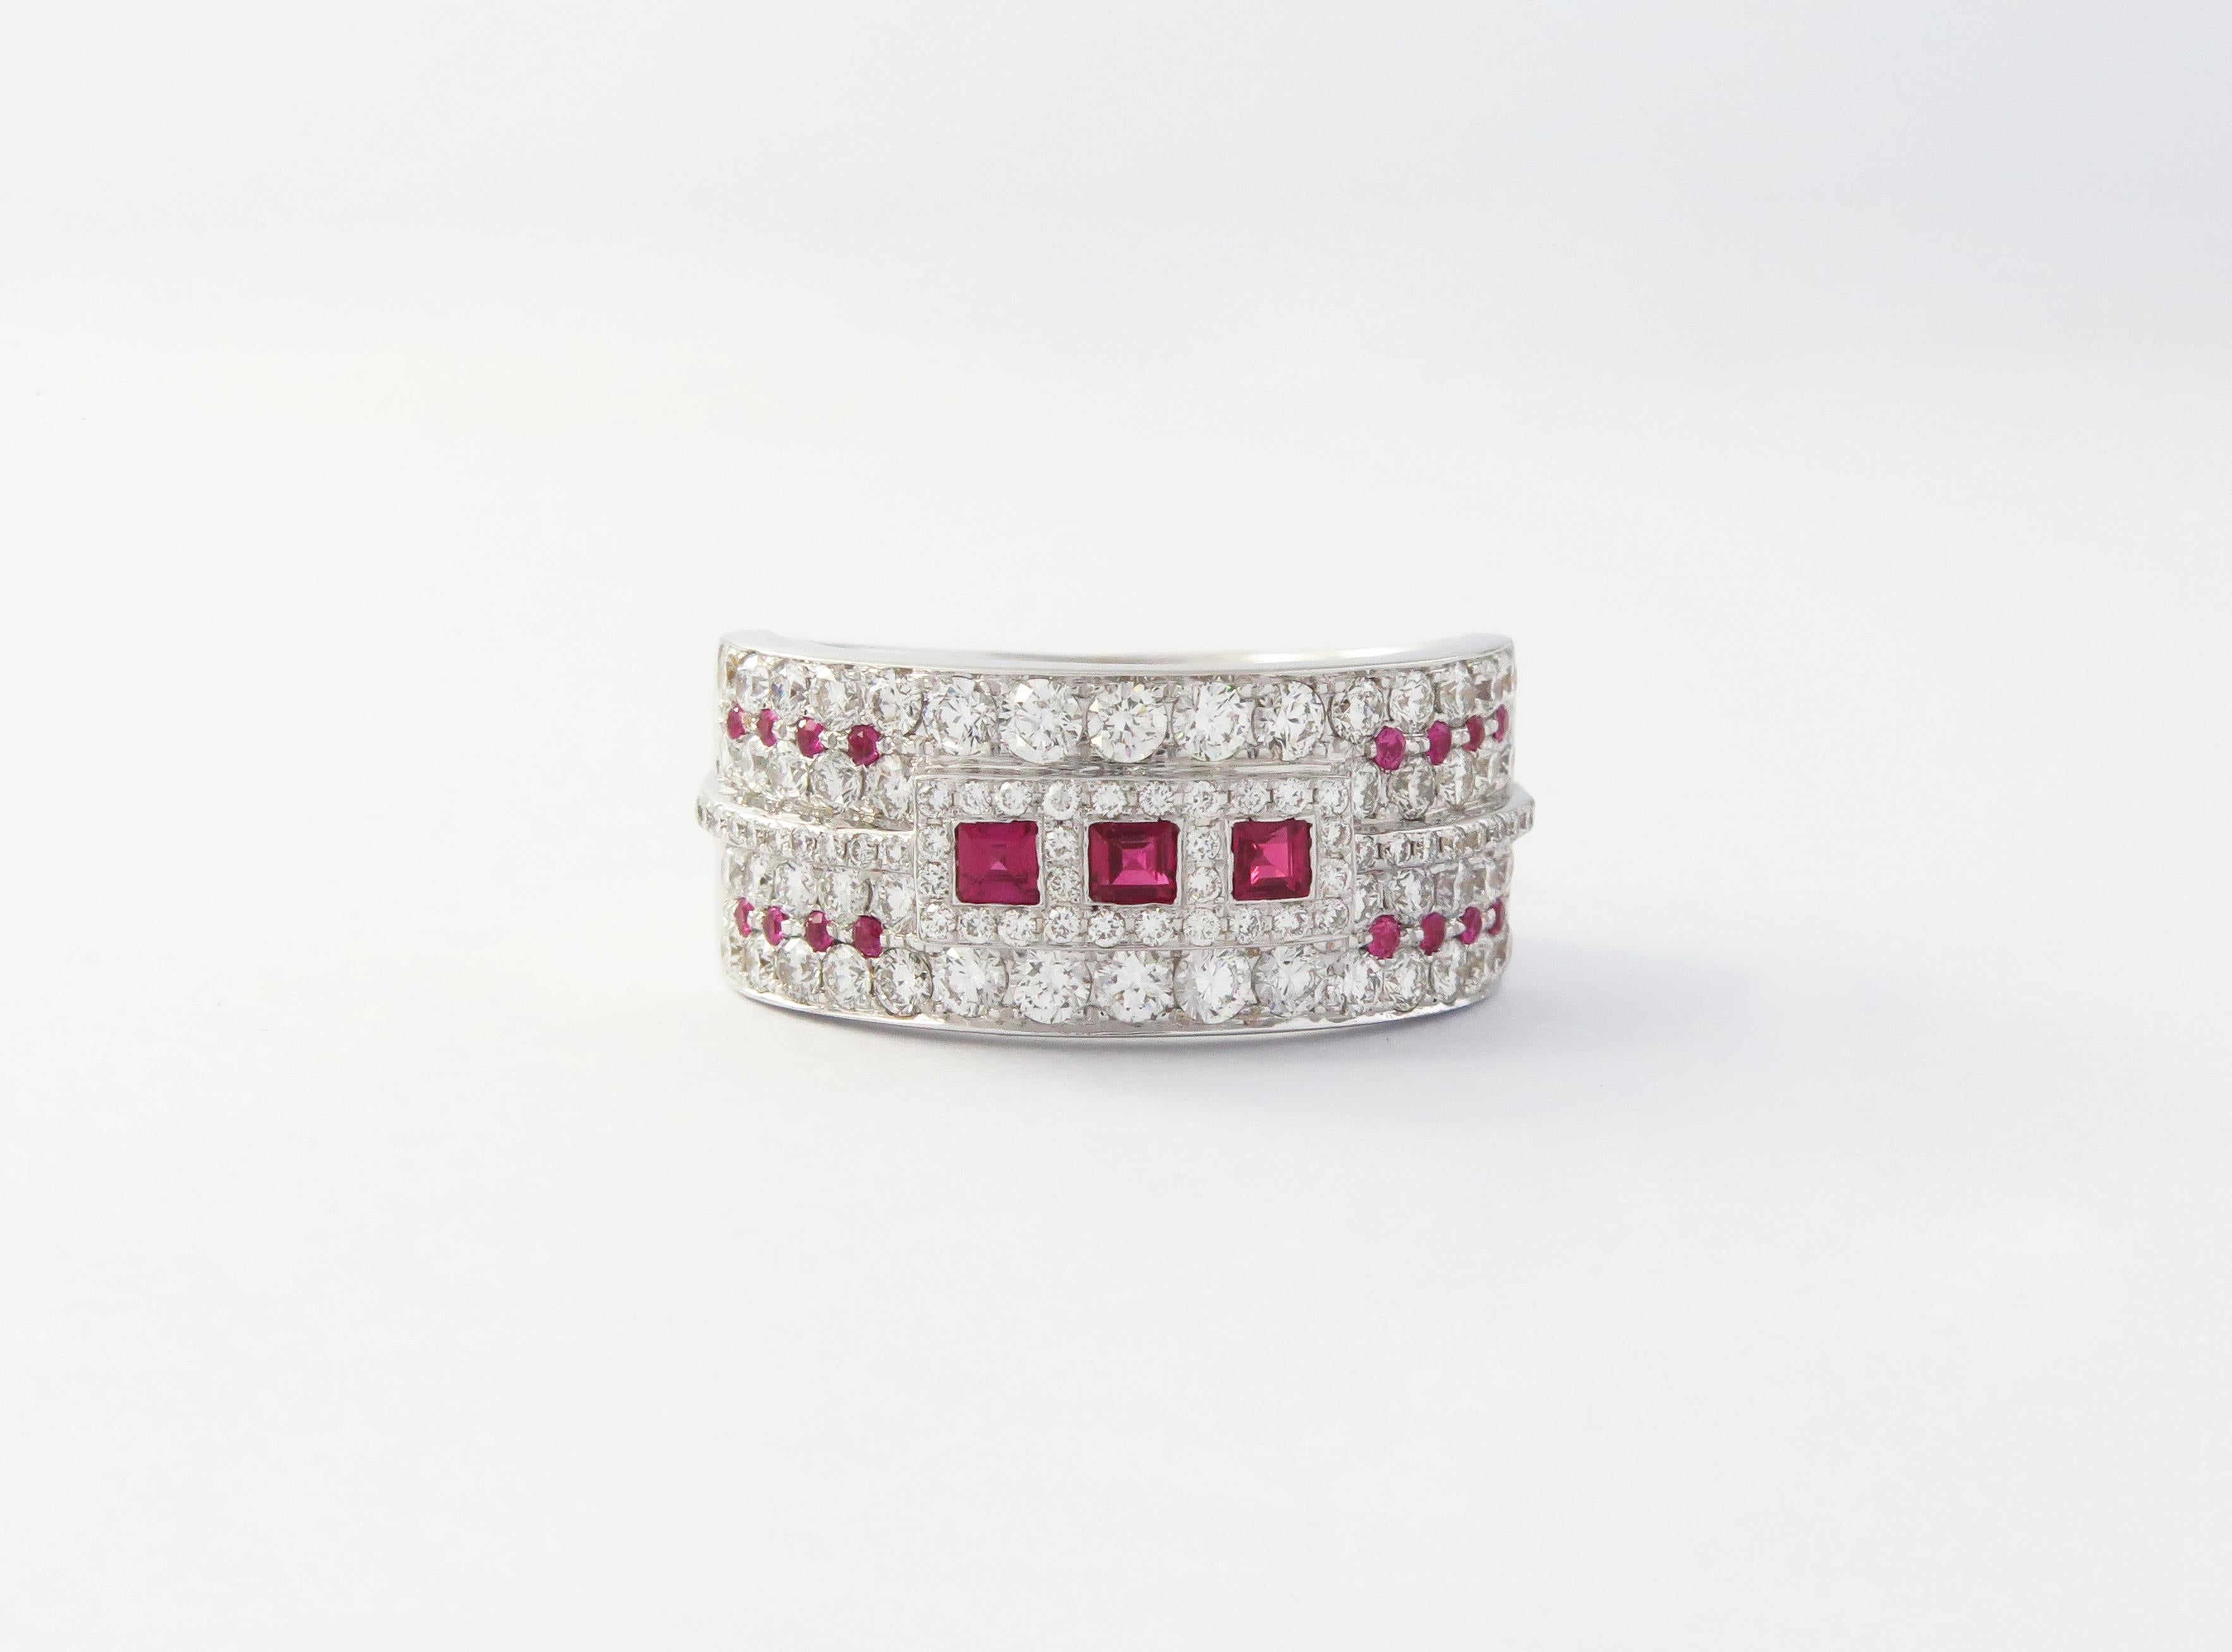 This 18K White Gold cocktail ring features  White Brilliant Diamond with beautiful Ruby stone. Combine with glamorous outfits for a show-stopping effect. Each diamond hand-selected by our experts for its superior luster and surface quality.

Our